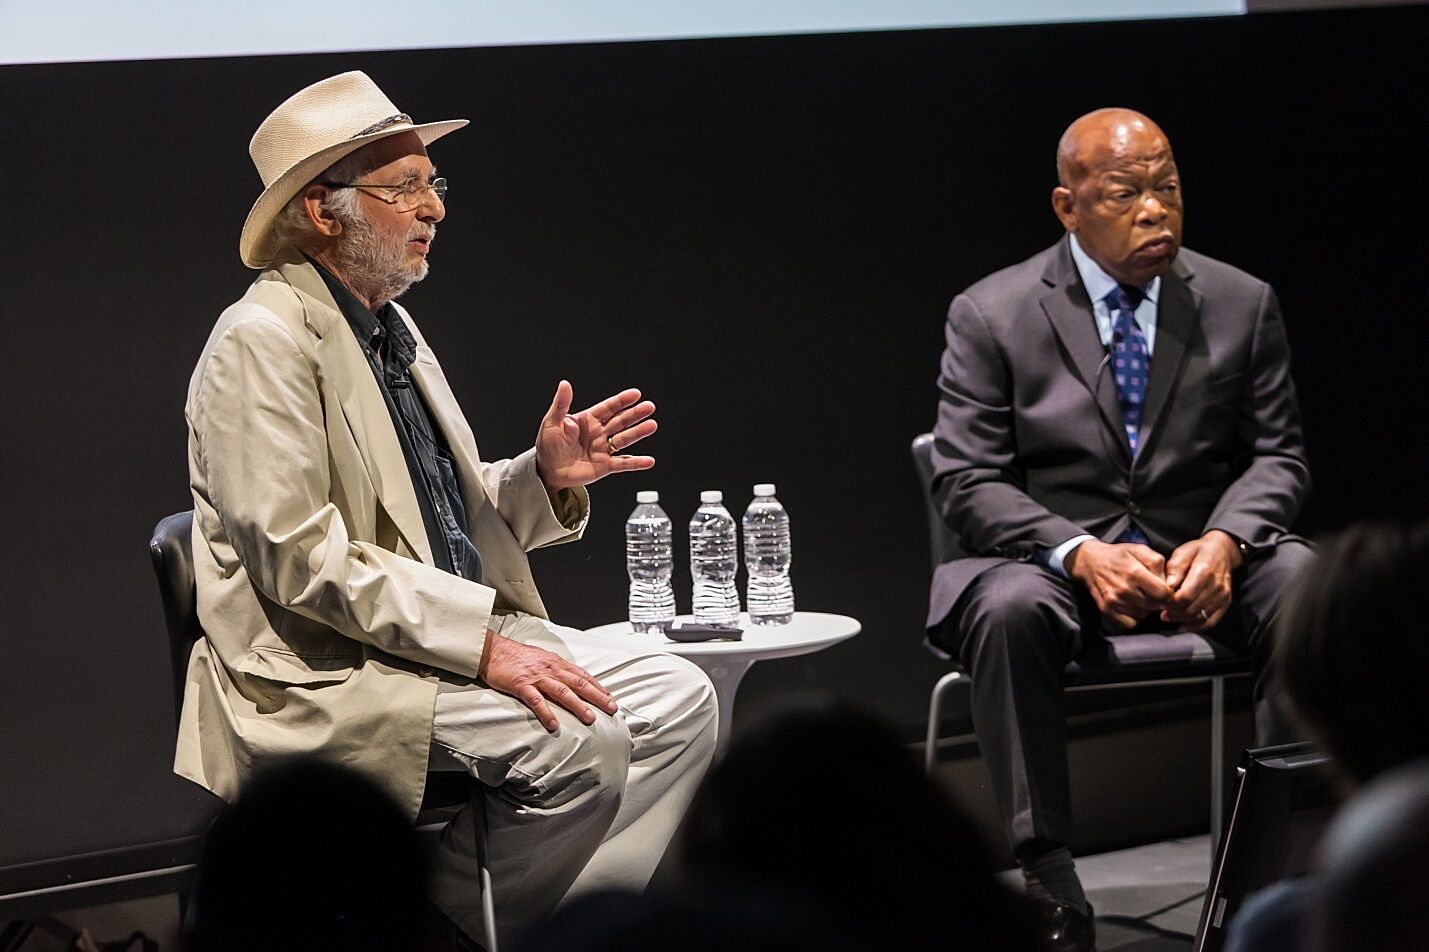 A public lecture at the Whitney with photographer Danny Lyon and Congressman John Lewis.